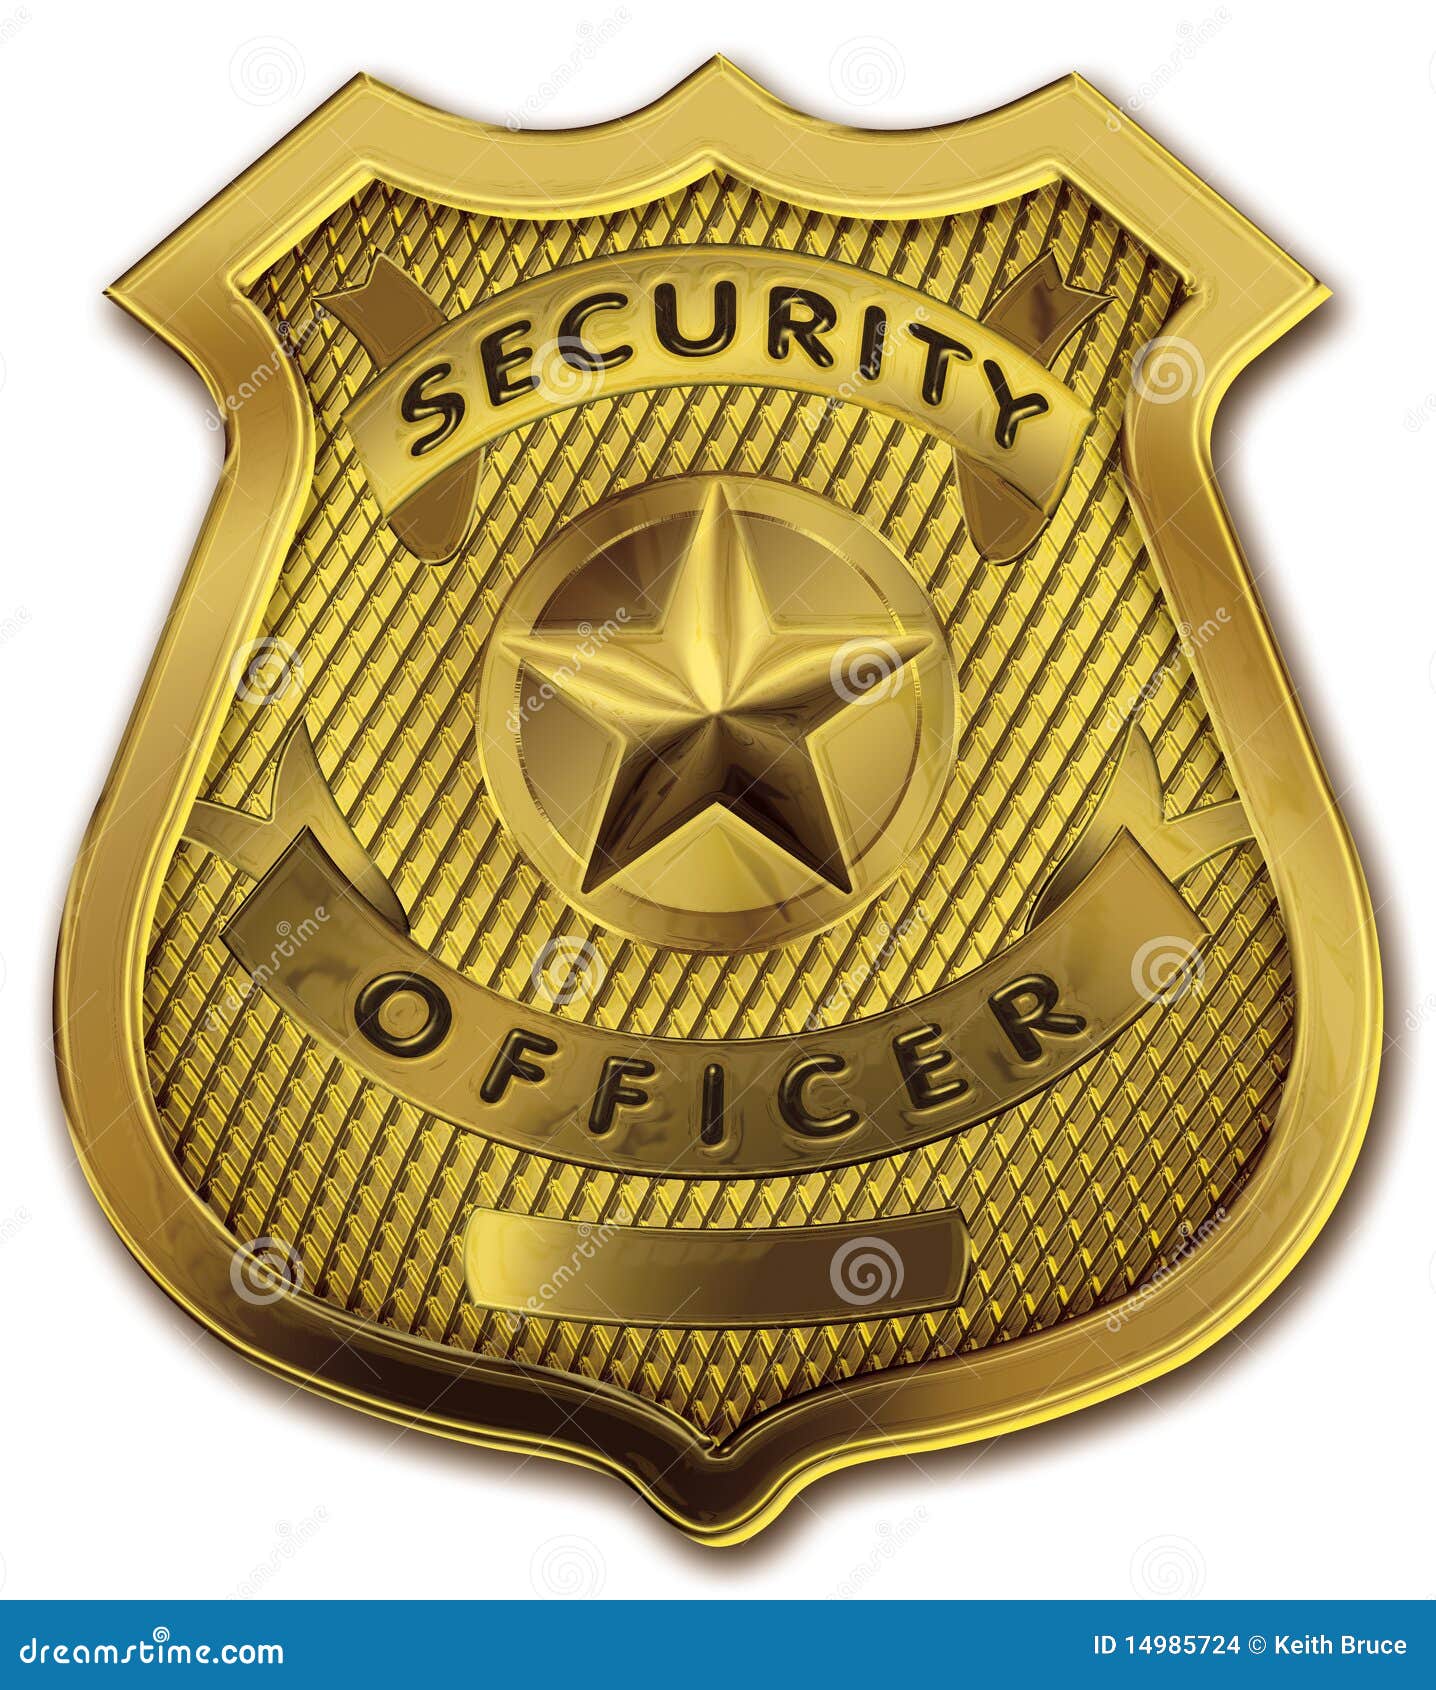 security officer clipart - photo #36